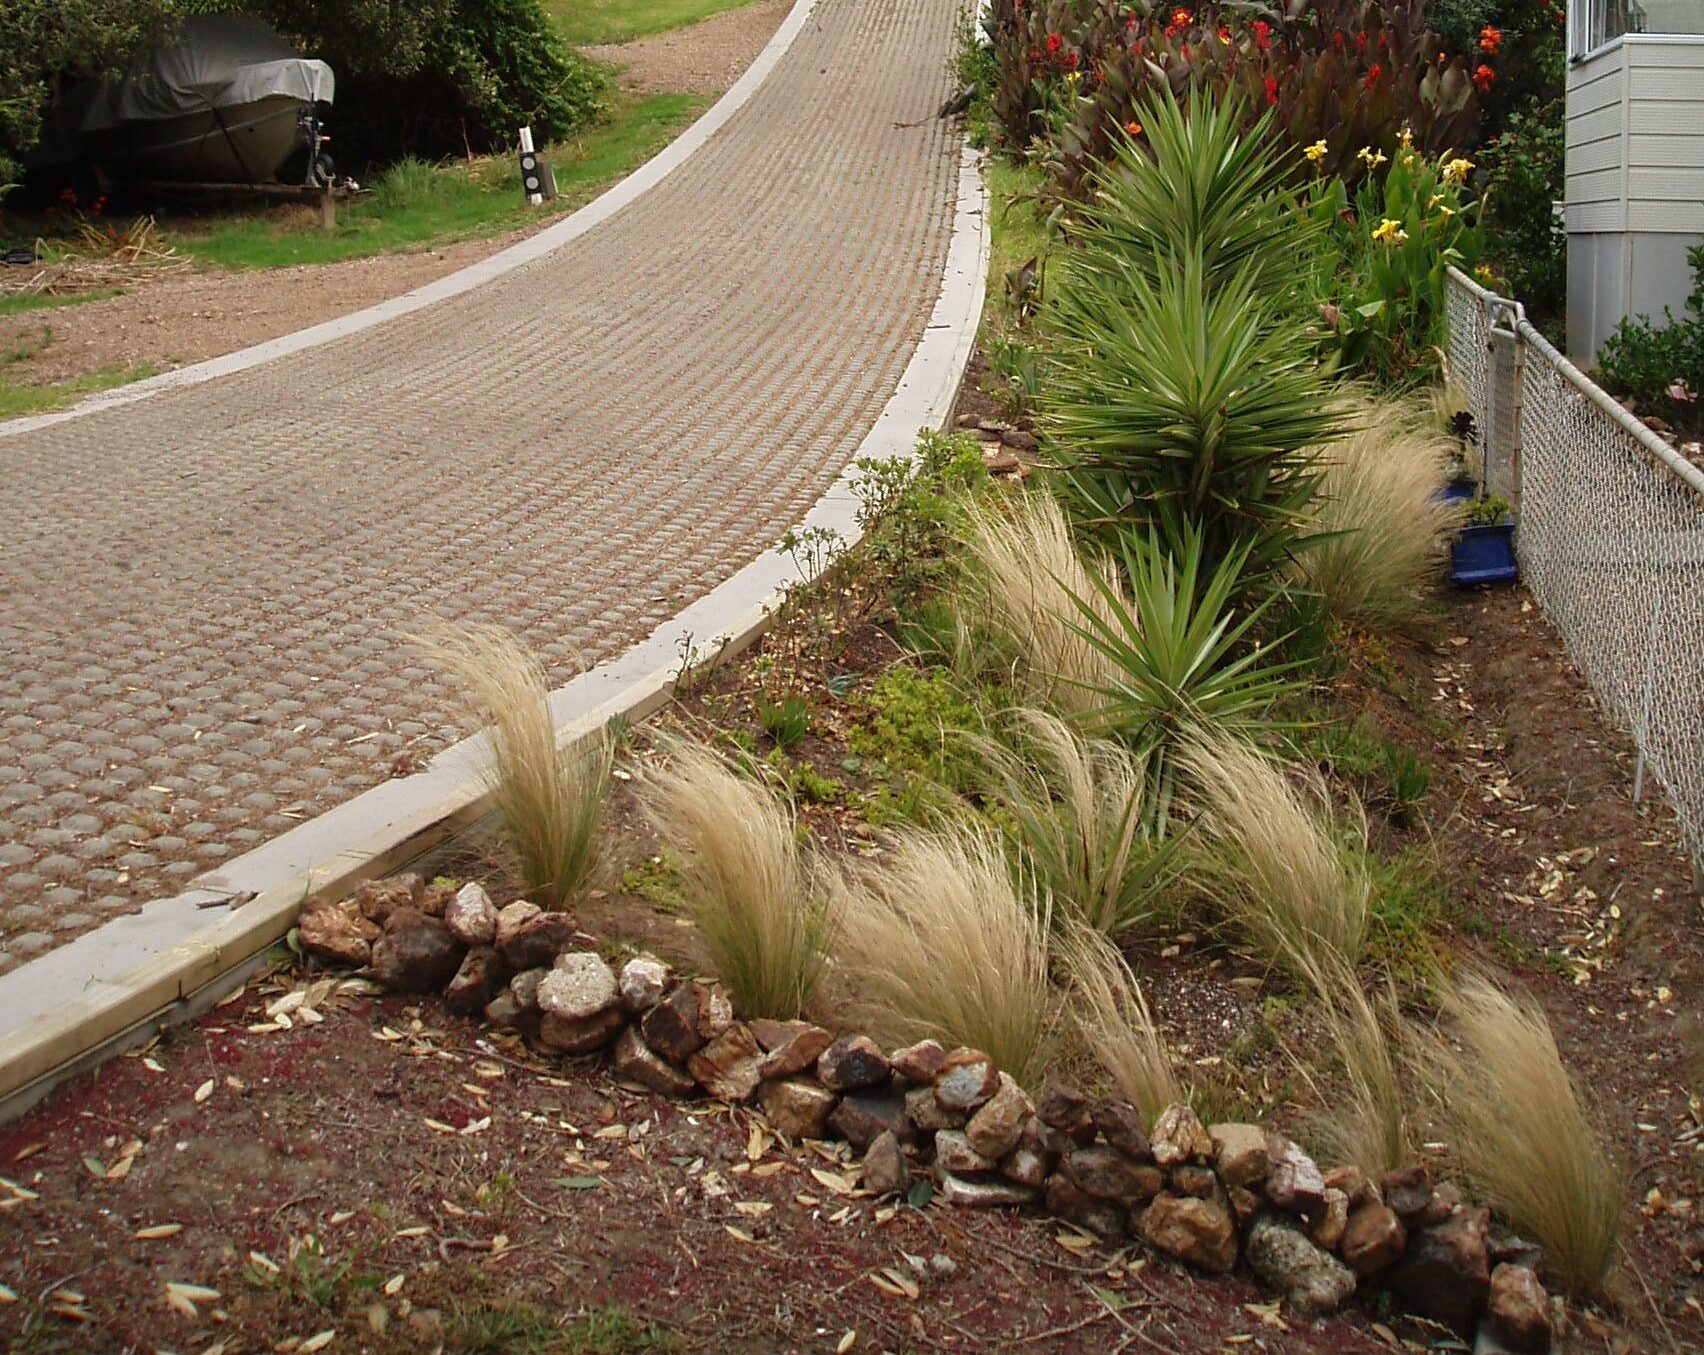 Photograph of Mexican feather grass planted next to a path.